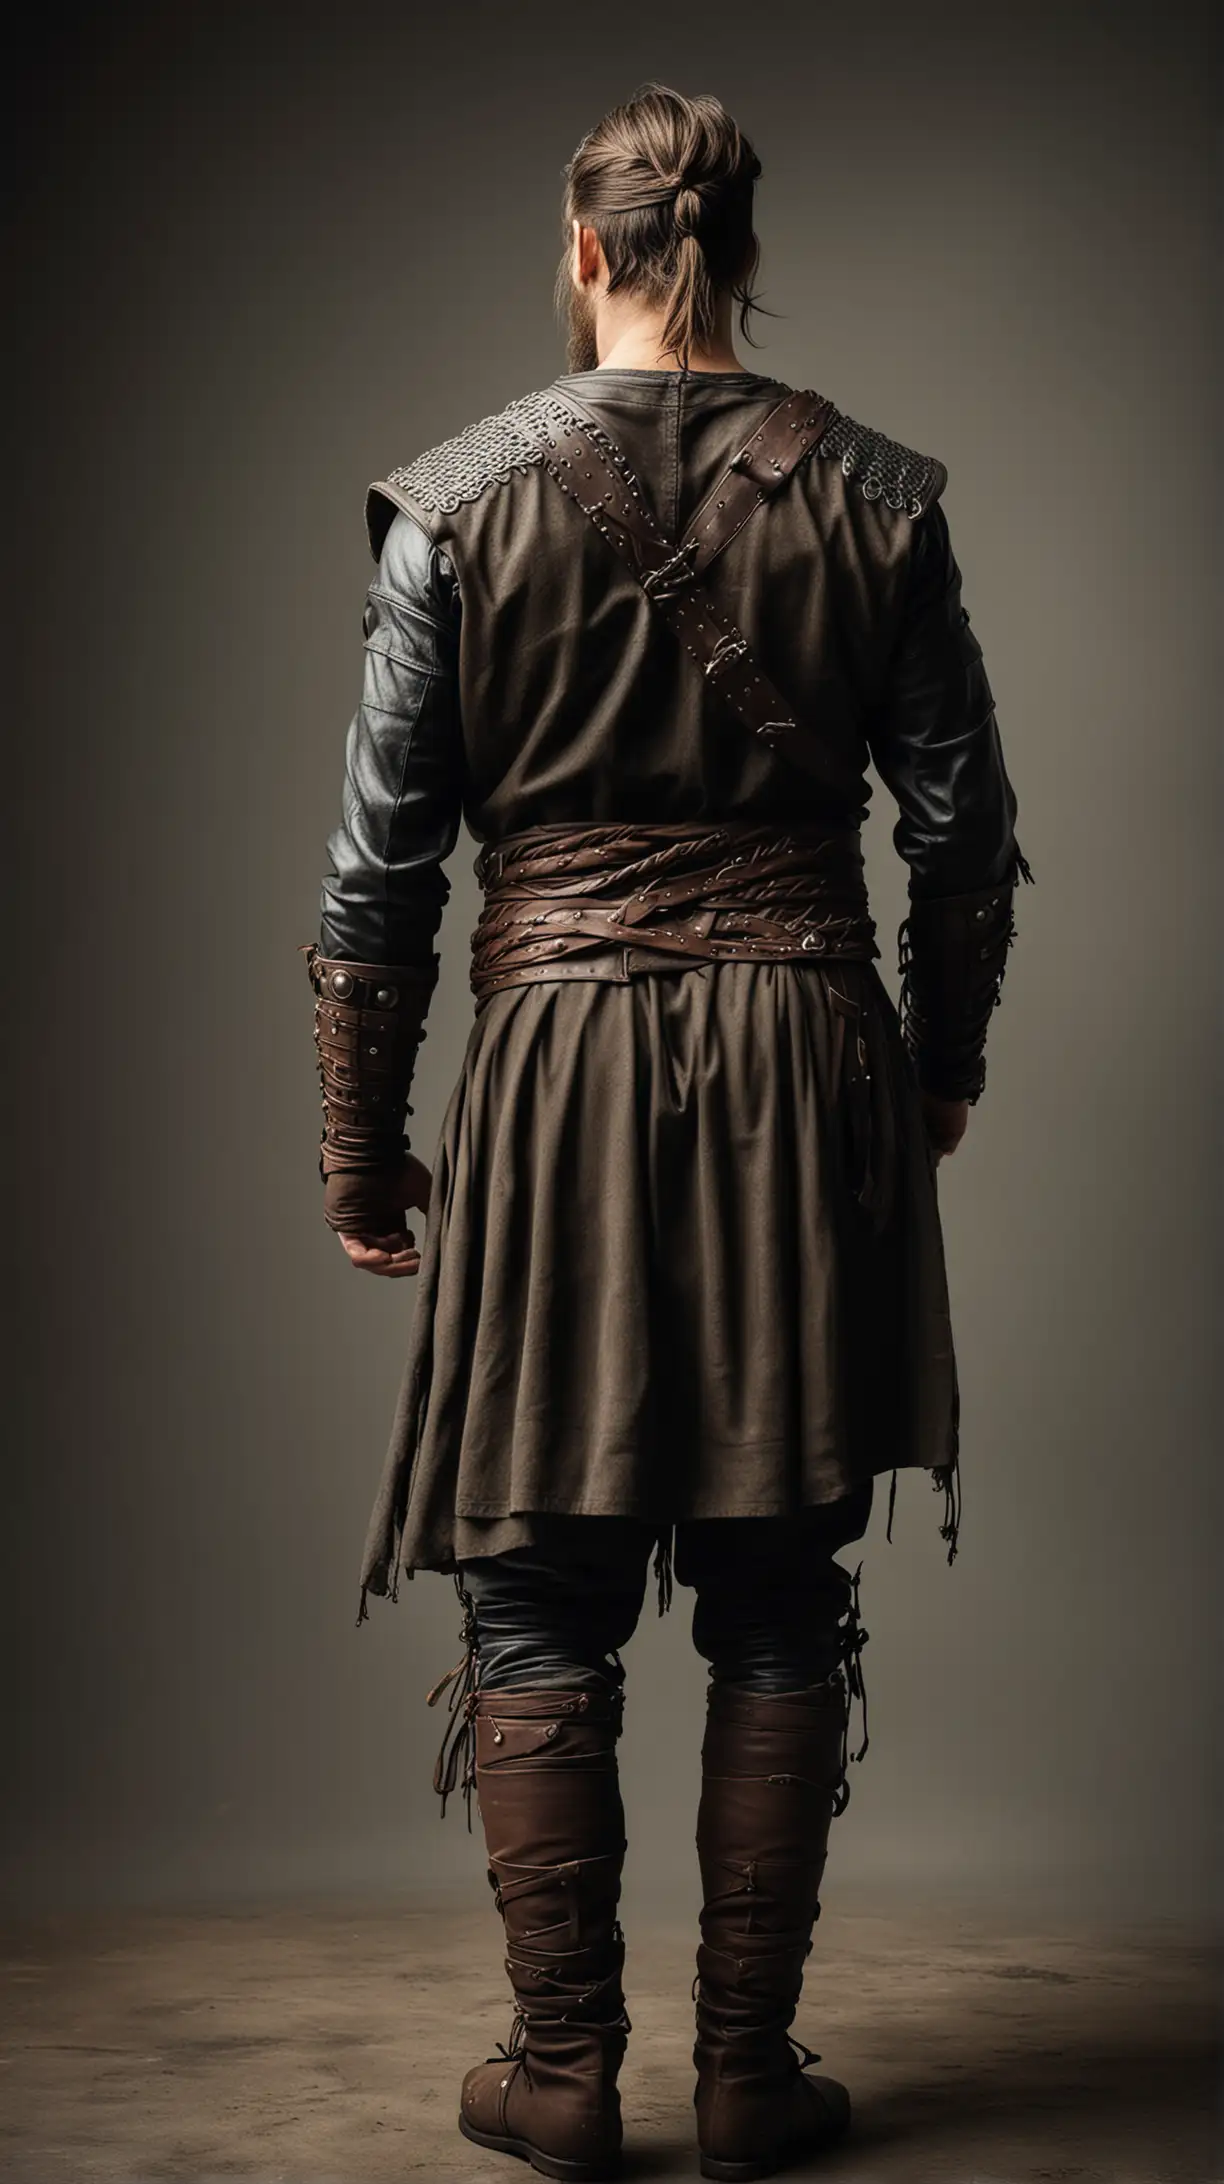 Muscular Viking Warrior in Traditional Leather Sleeve Attire